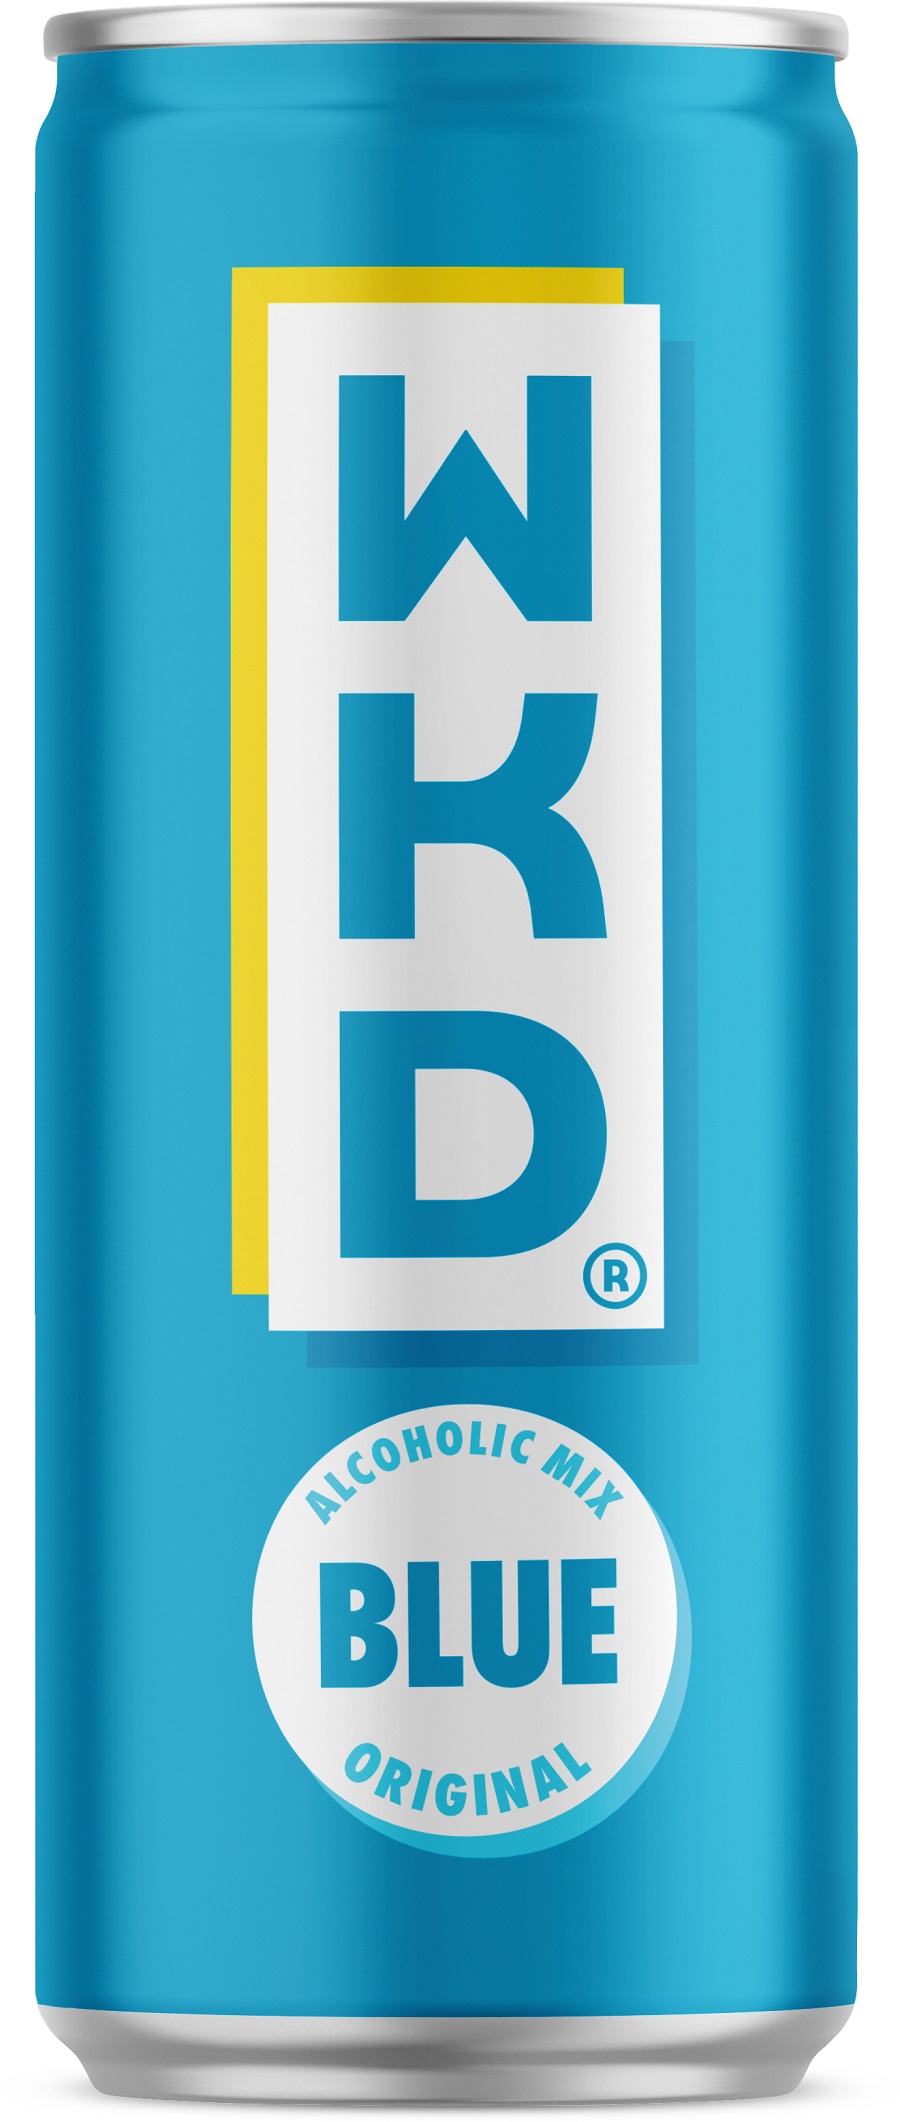 WKD opportunities are in the can